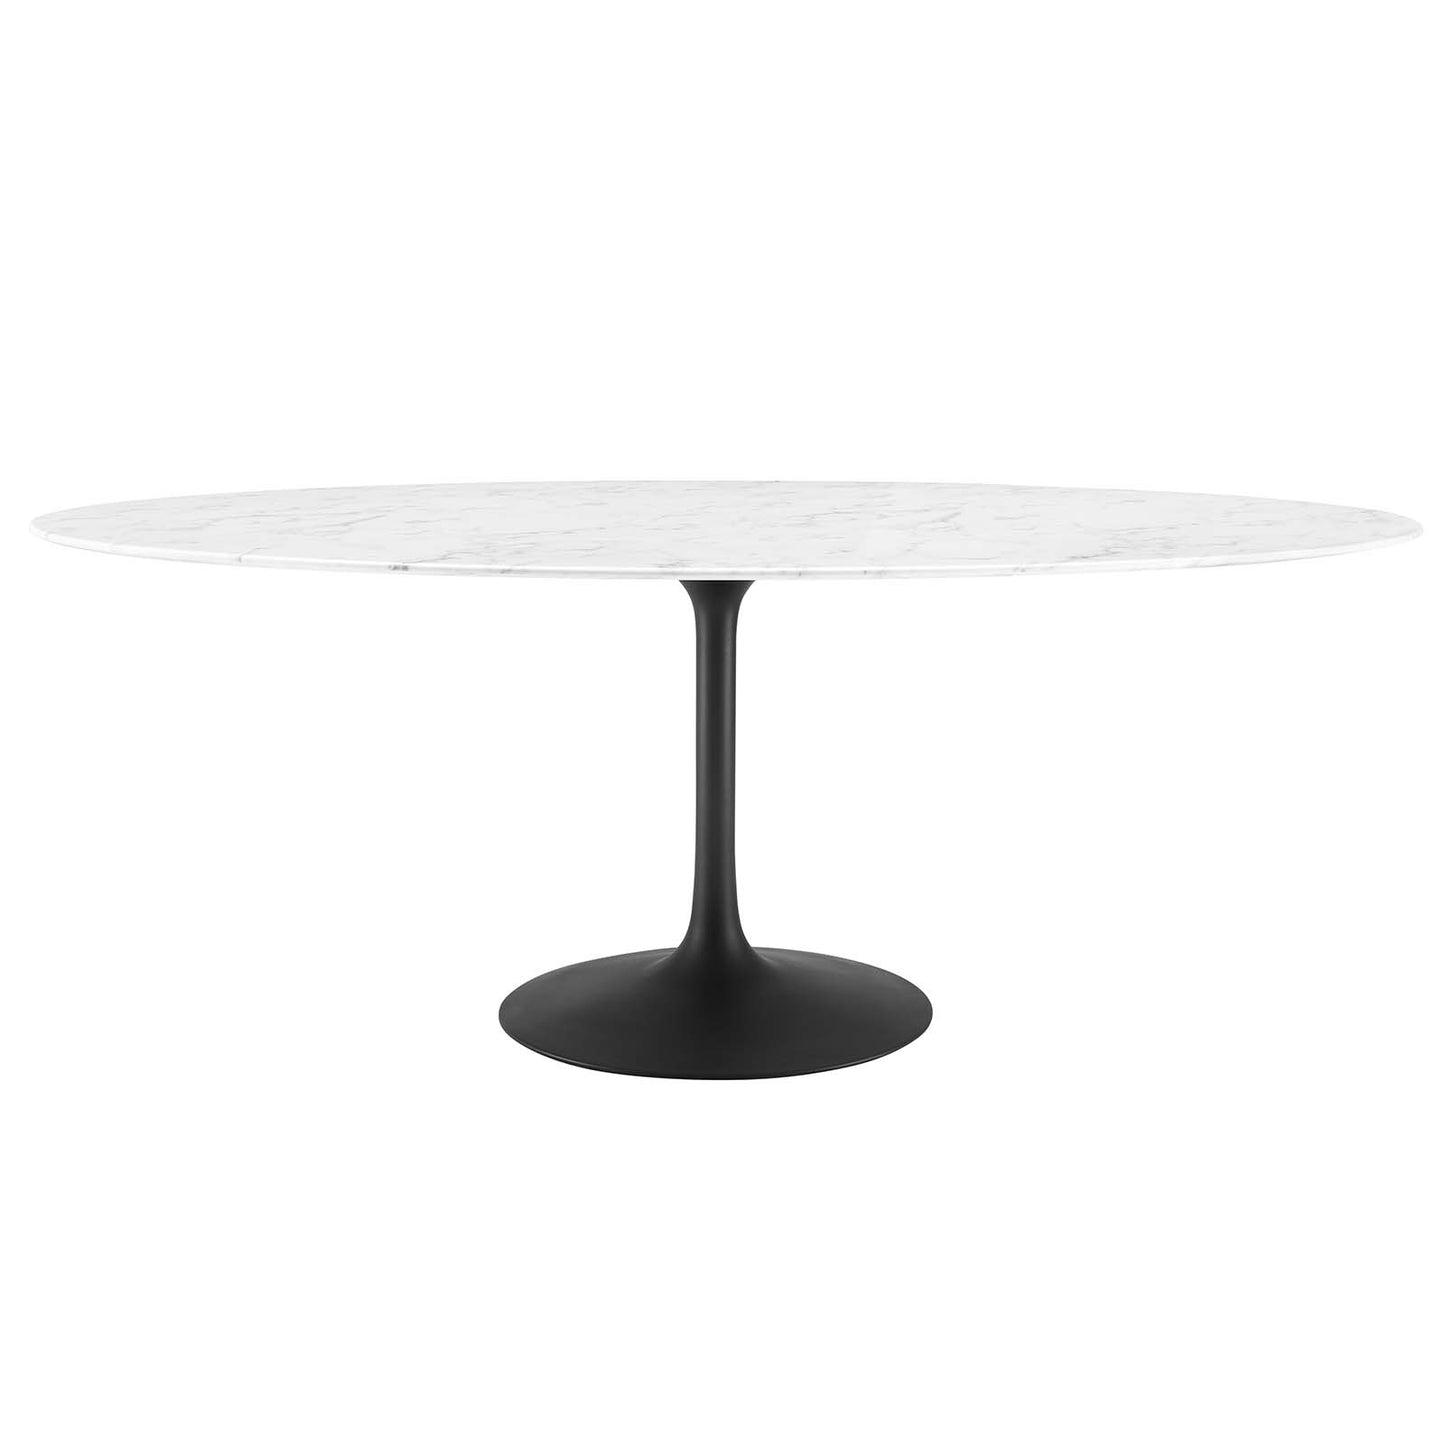 Modway Lippa 78" Oval Artificial Marble Dining Table - EEI-3542